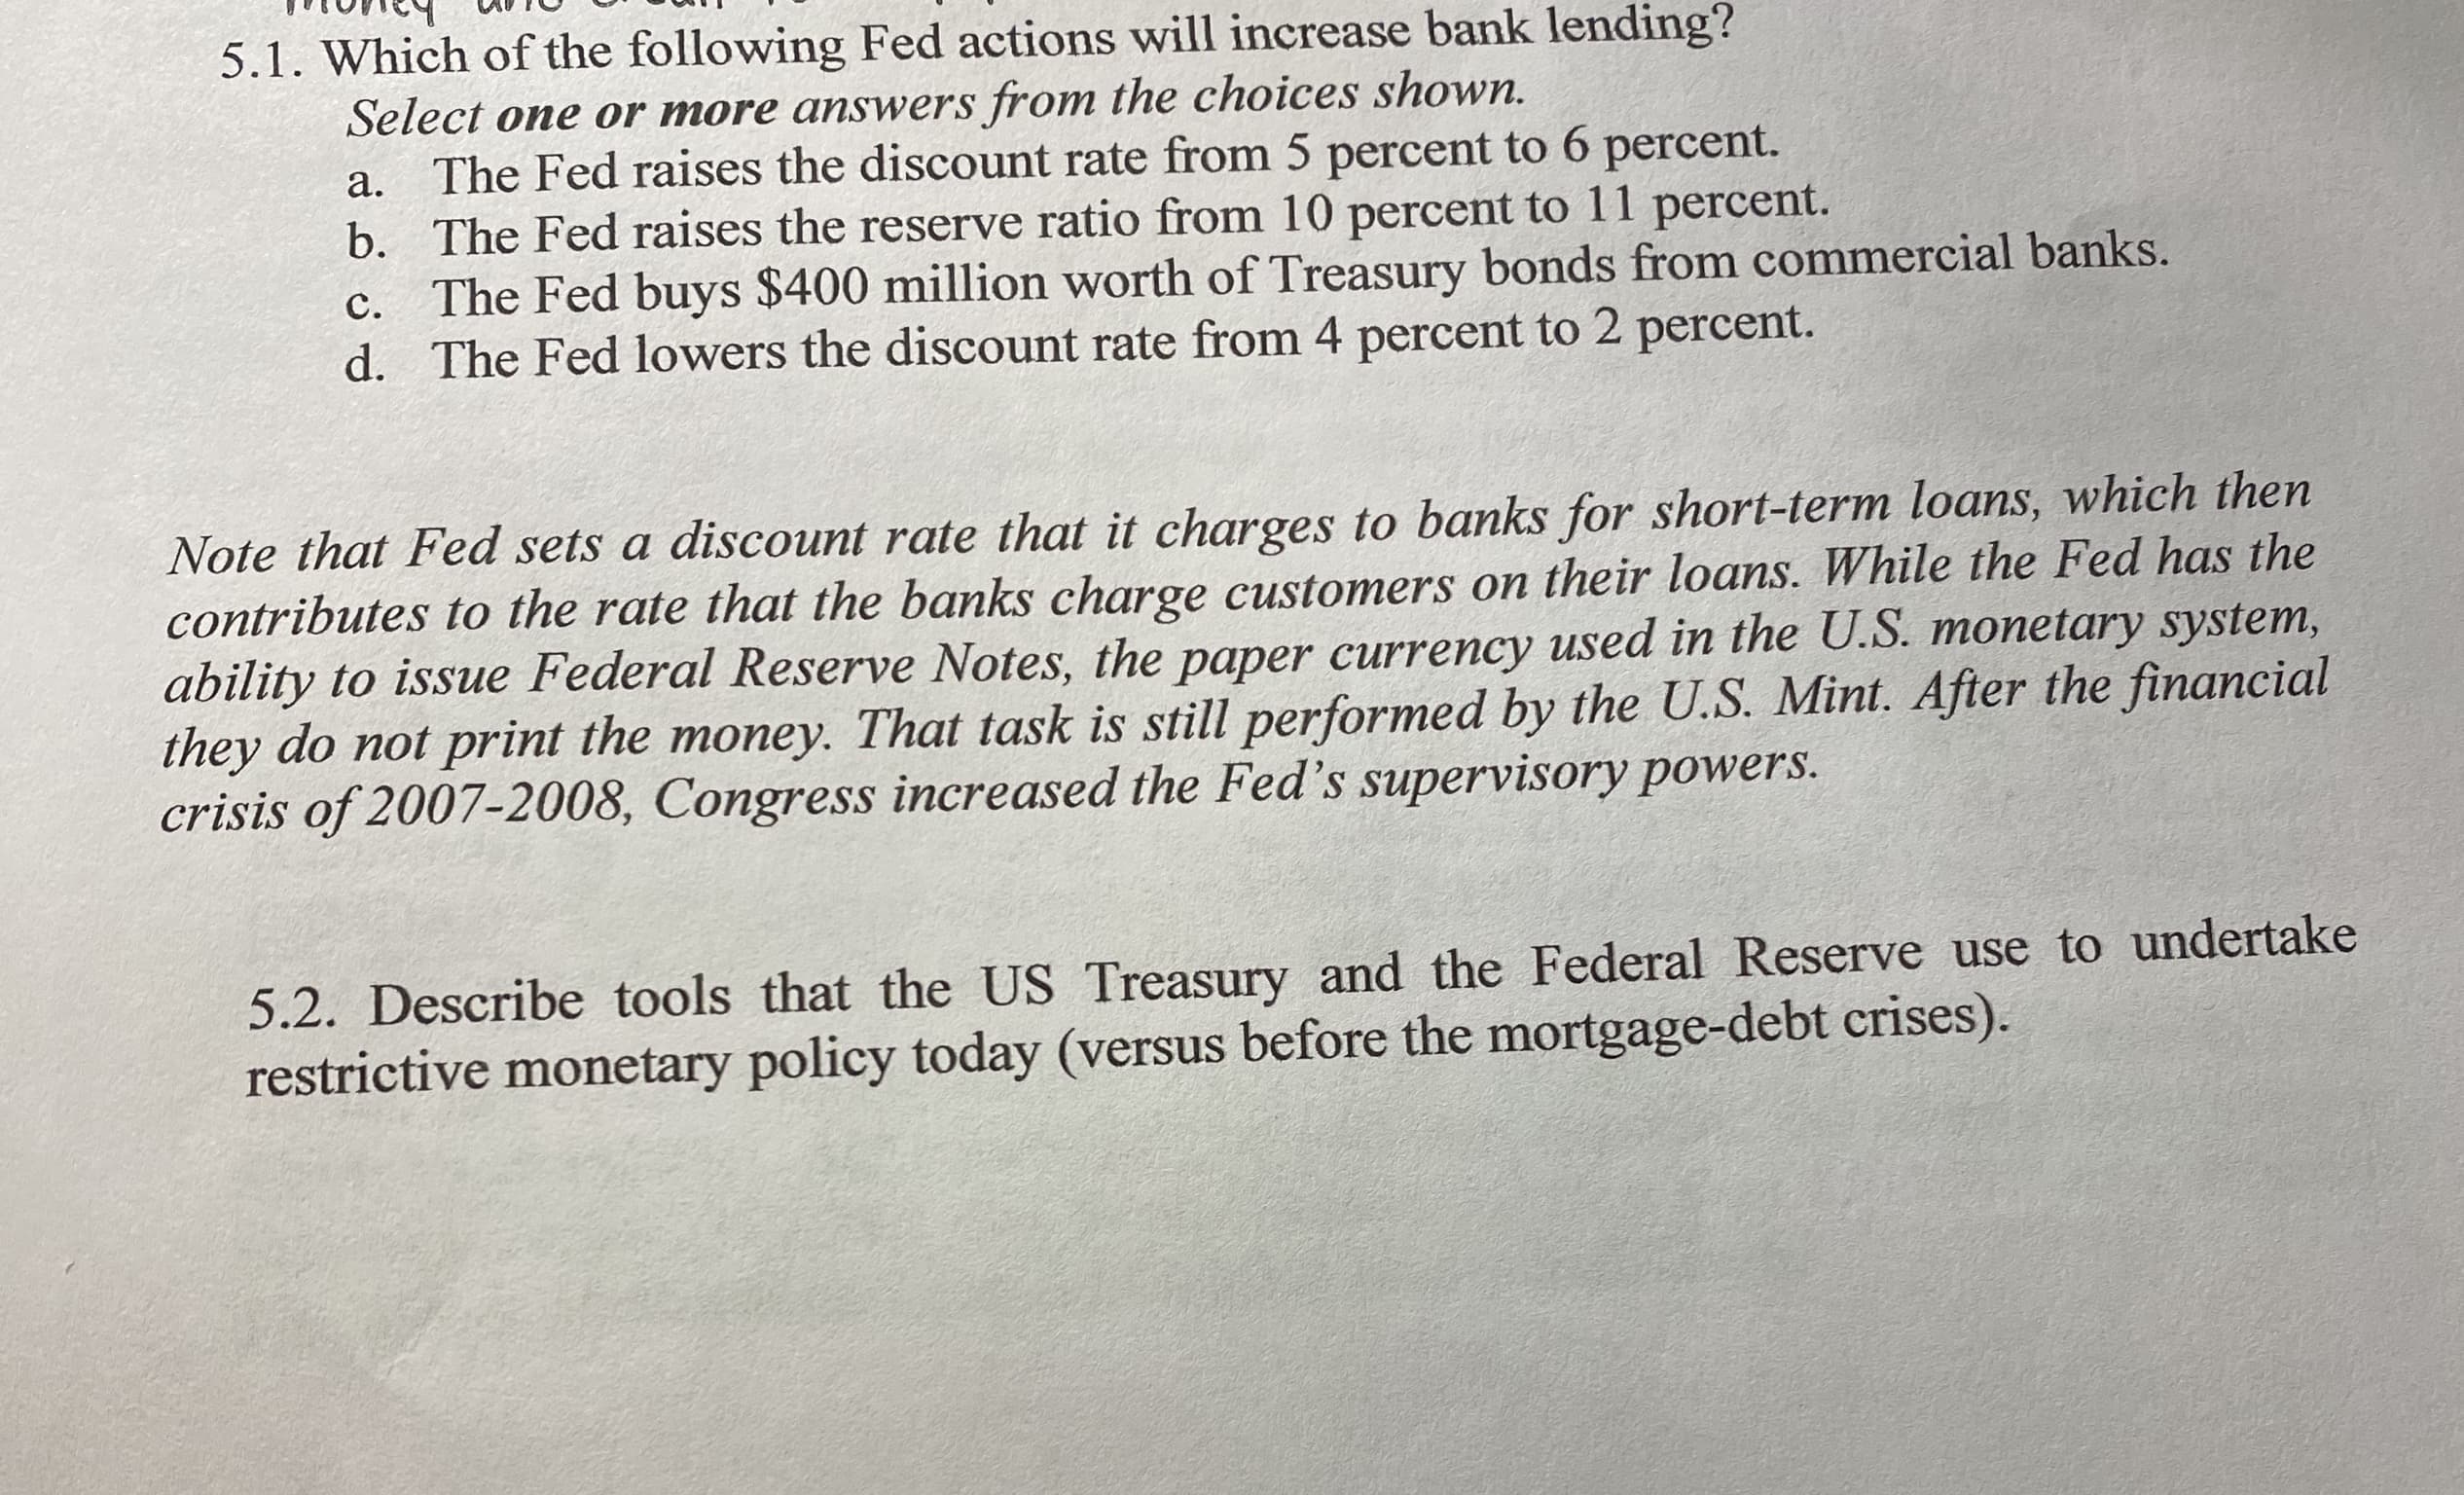 5.1. Which of the following Fed actions will
Select one or more answers from the choices shown.
The Fed raises the discount rate from 5 percent to 6 percent.
b. The Fed raises the reserve ratio from 10 percent to 11 percent.
c. The Fed buys $400 million worth of Treasury bonds from commercial banks.
d. The Fed lowers the discount rate from 4 percent to 2 percent.
а.
с.
